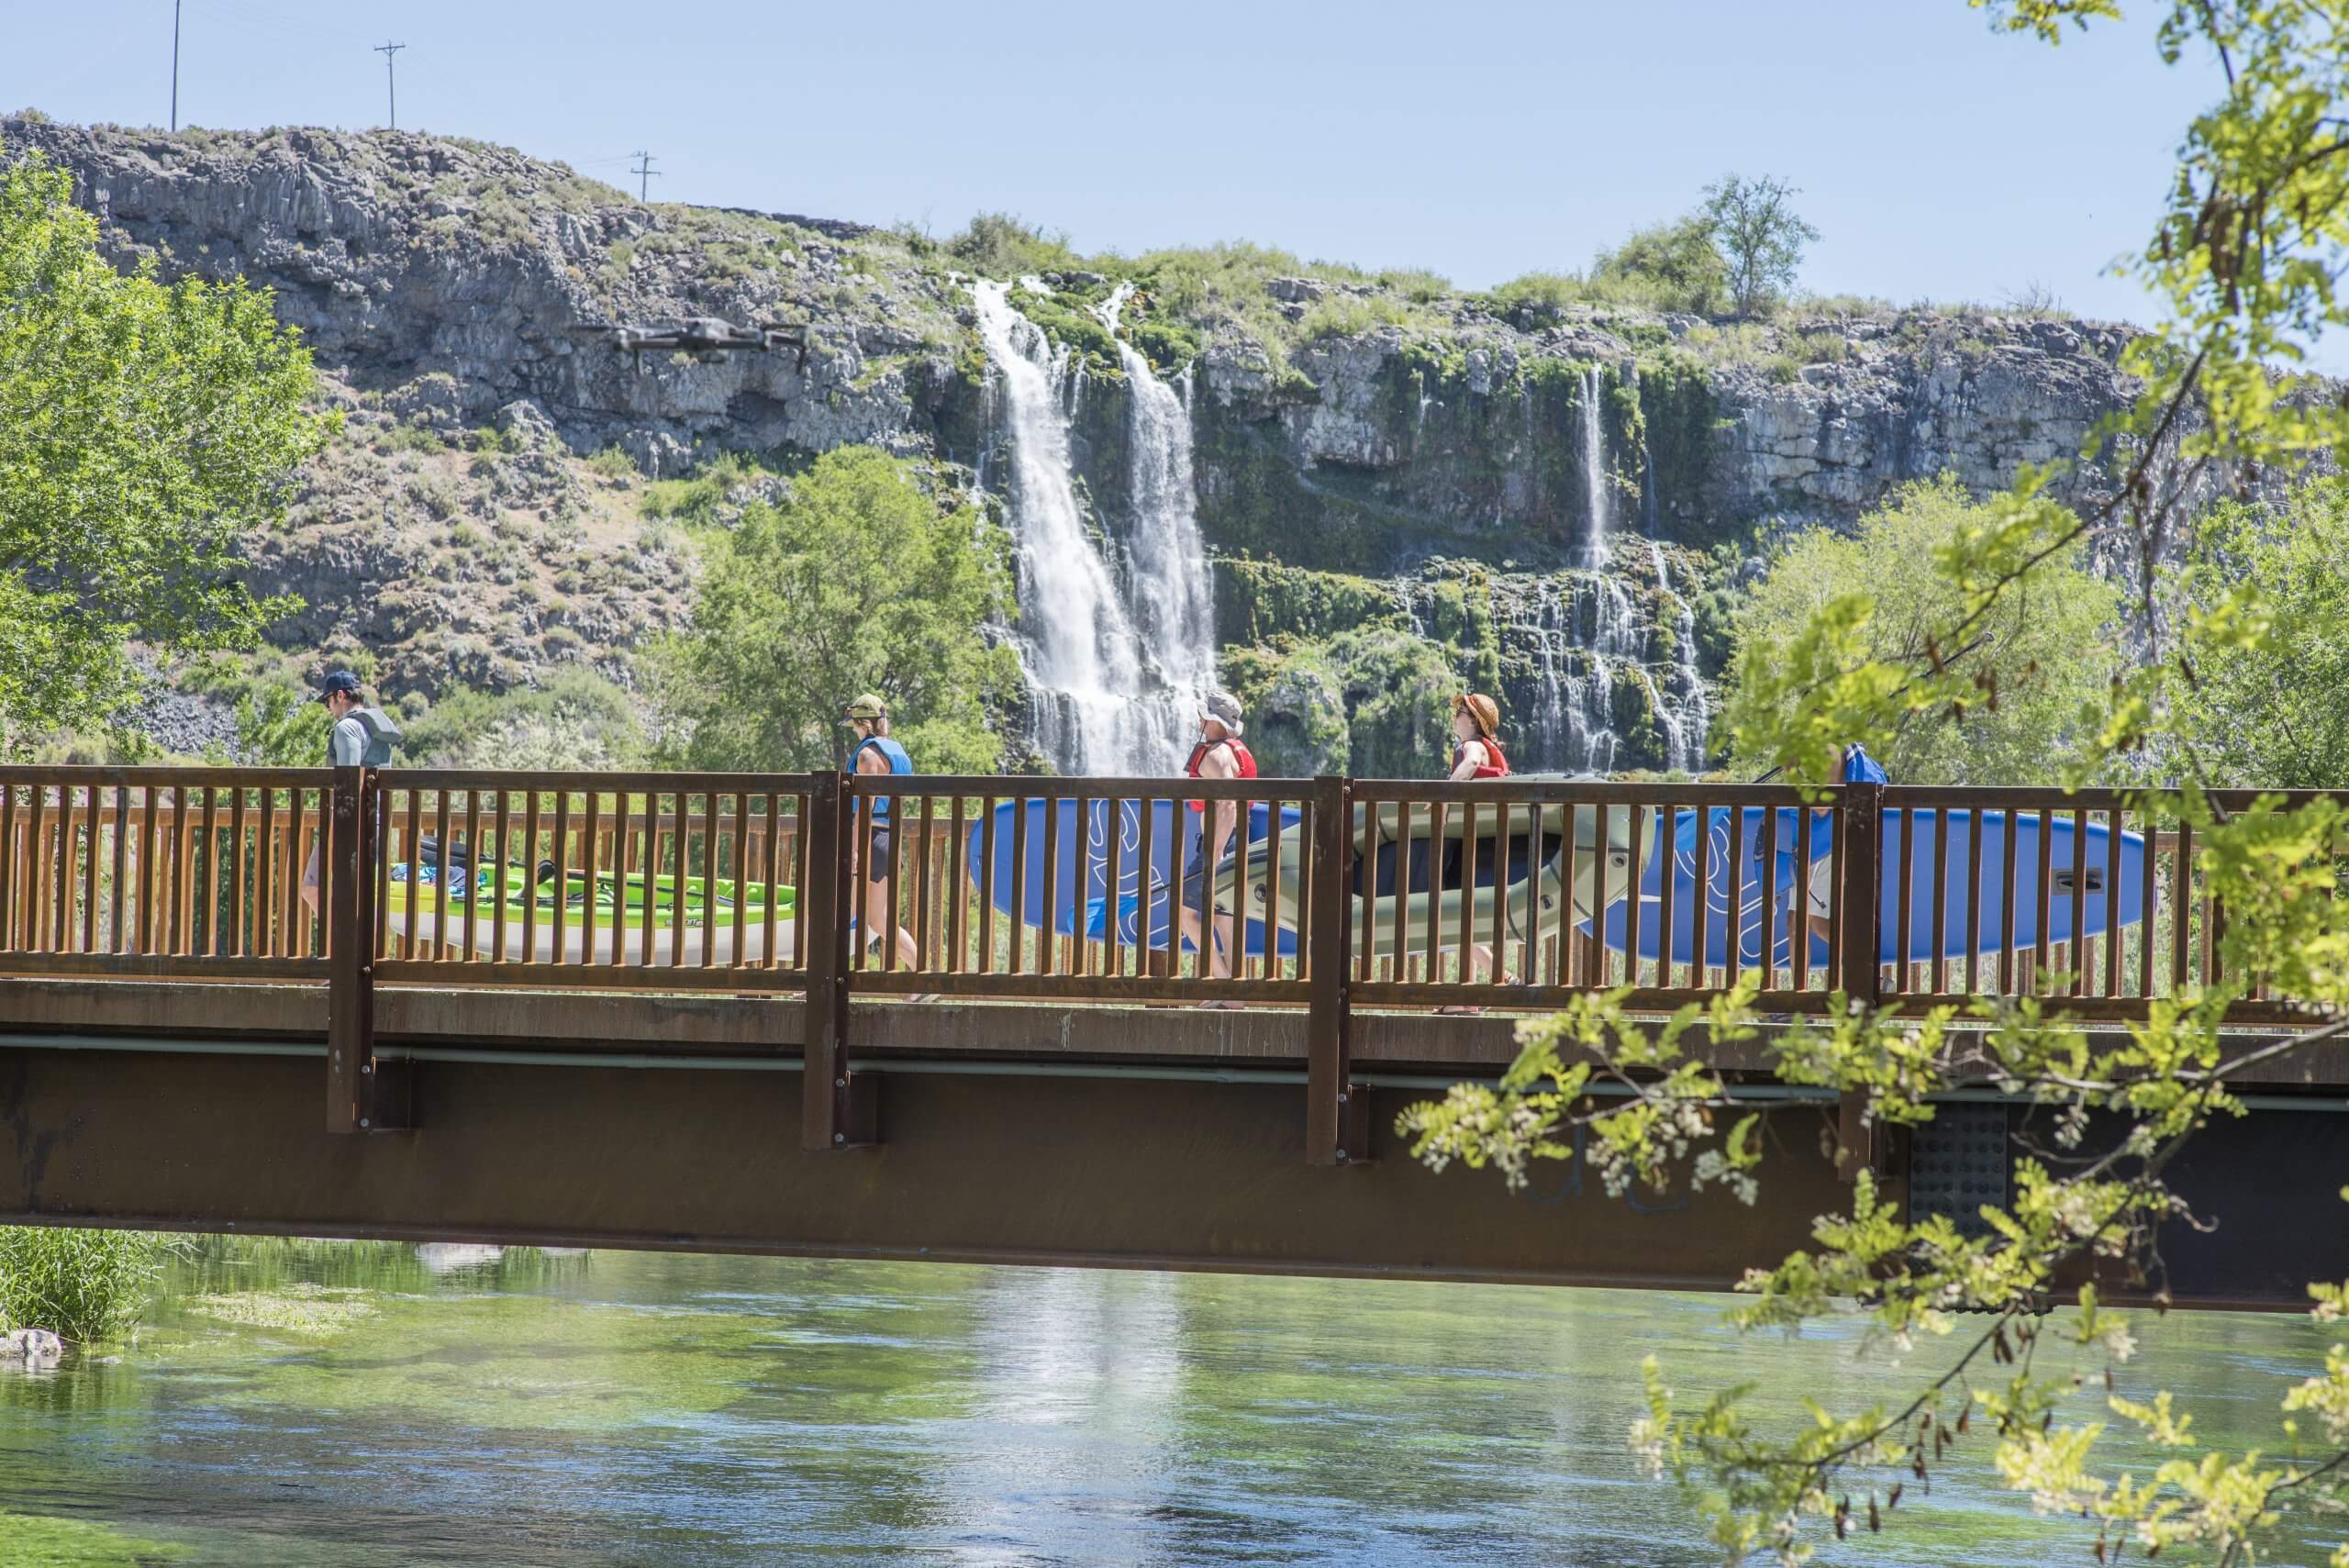 A group of people walking a cross a bridge carrying standup paddlenboards, and a waterfall in the background at Thousand Springs State Park.